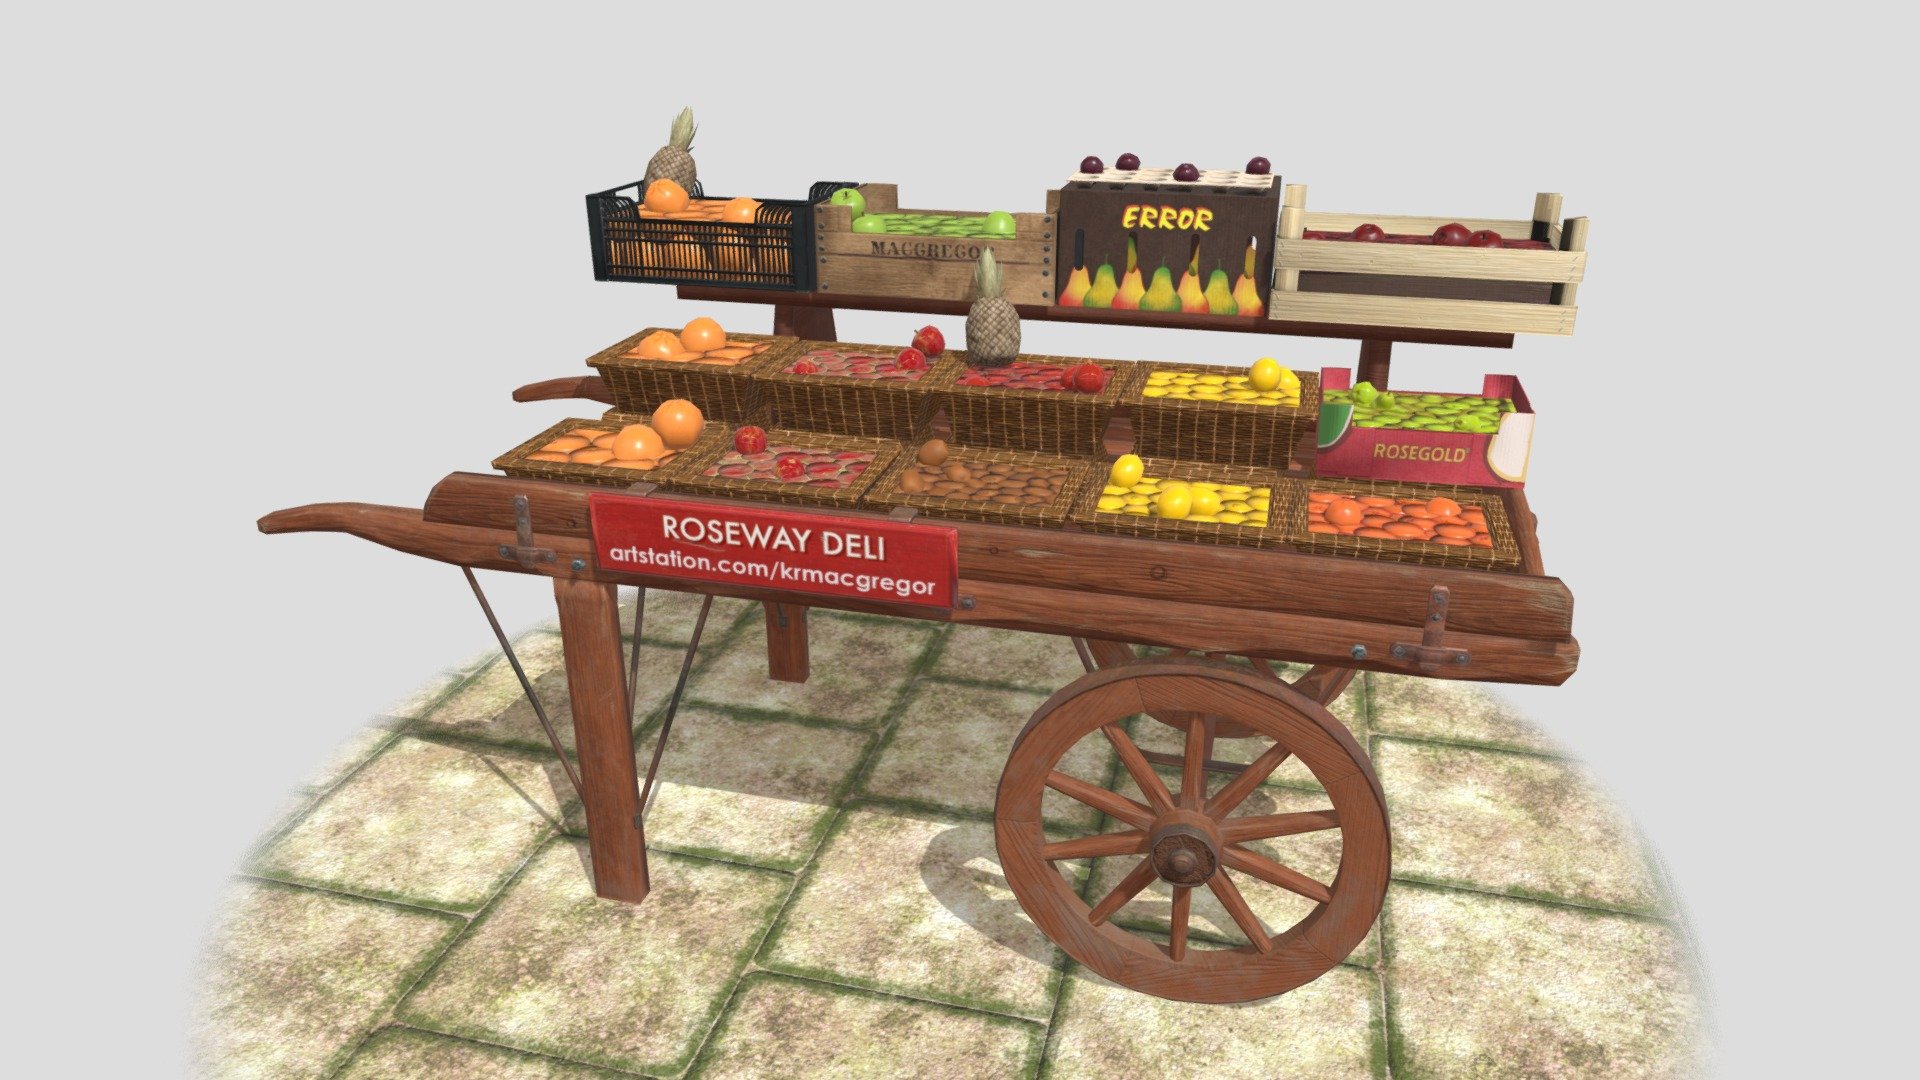 I re-did this project of a Model of a fruit cart made for a Live Brief at the University of Hertfordshire in collaboration with Playground Games. This time I kept the model as low as possible 3d model